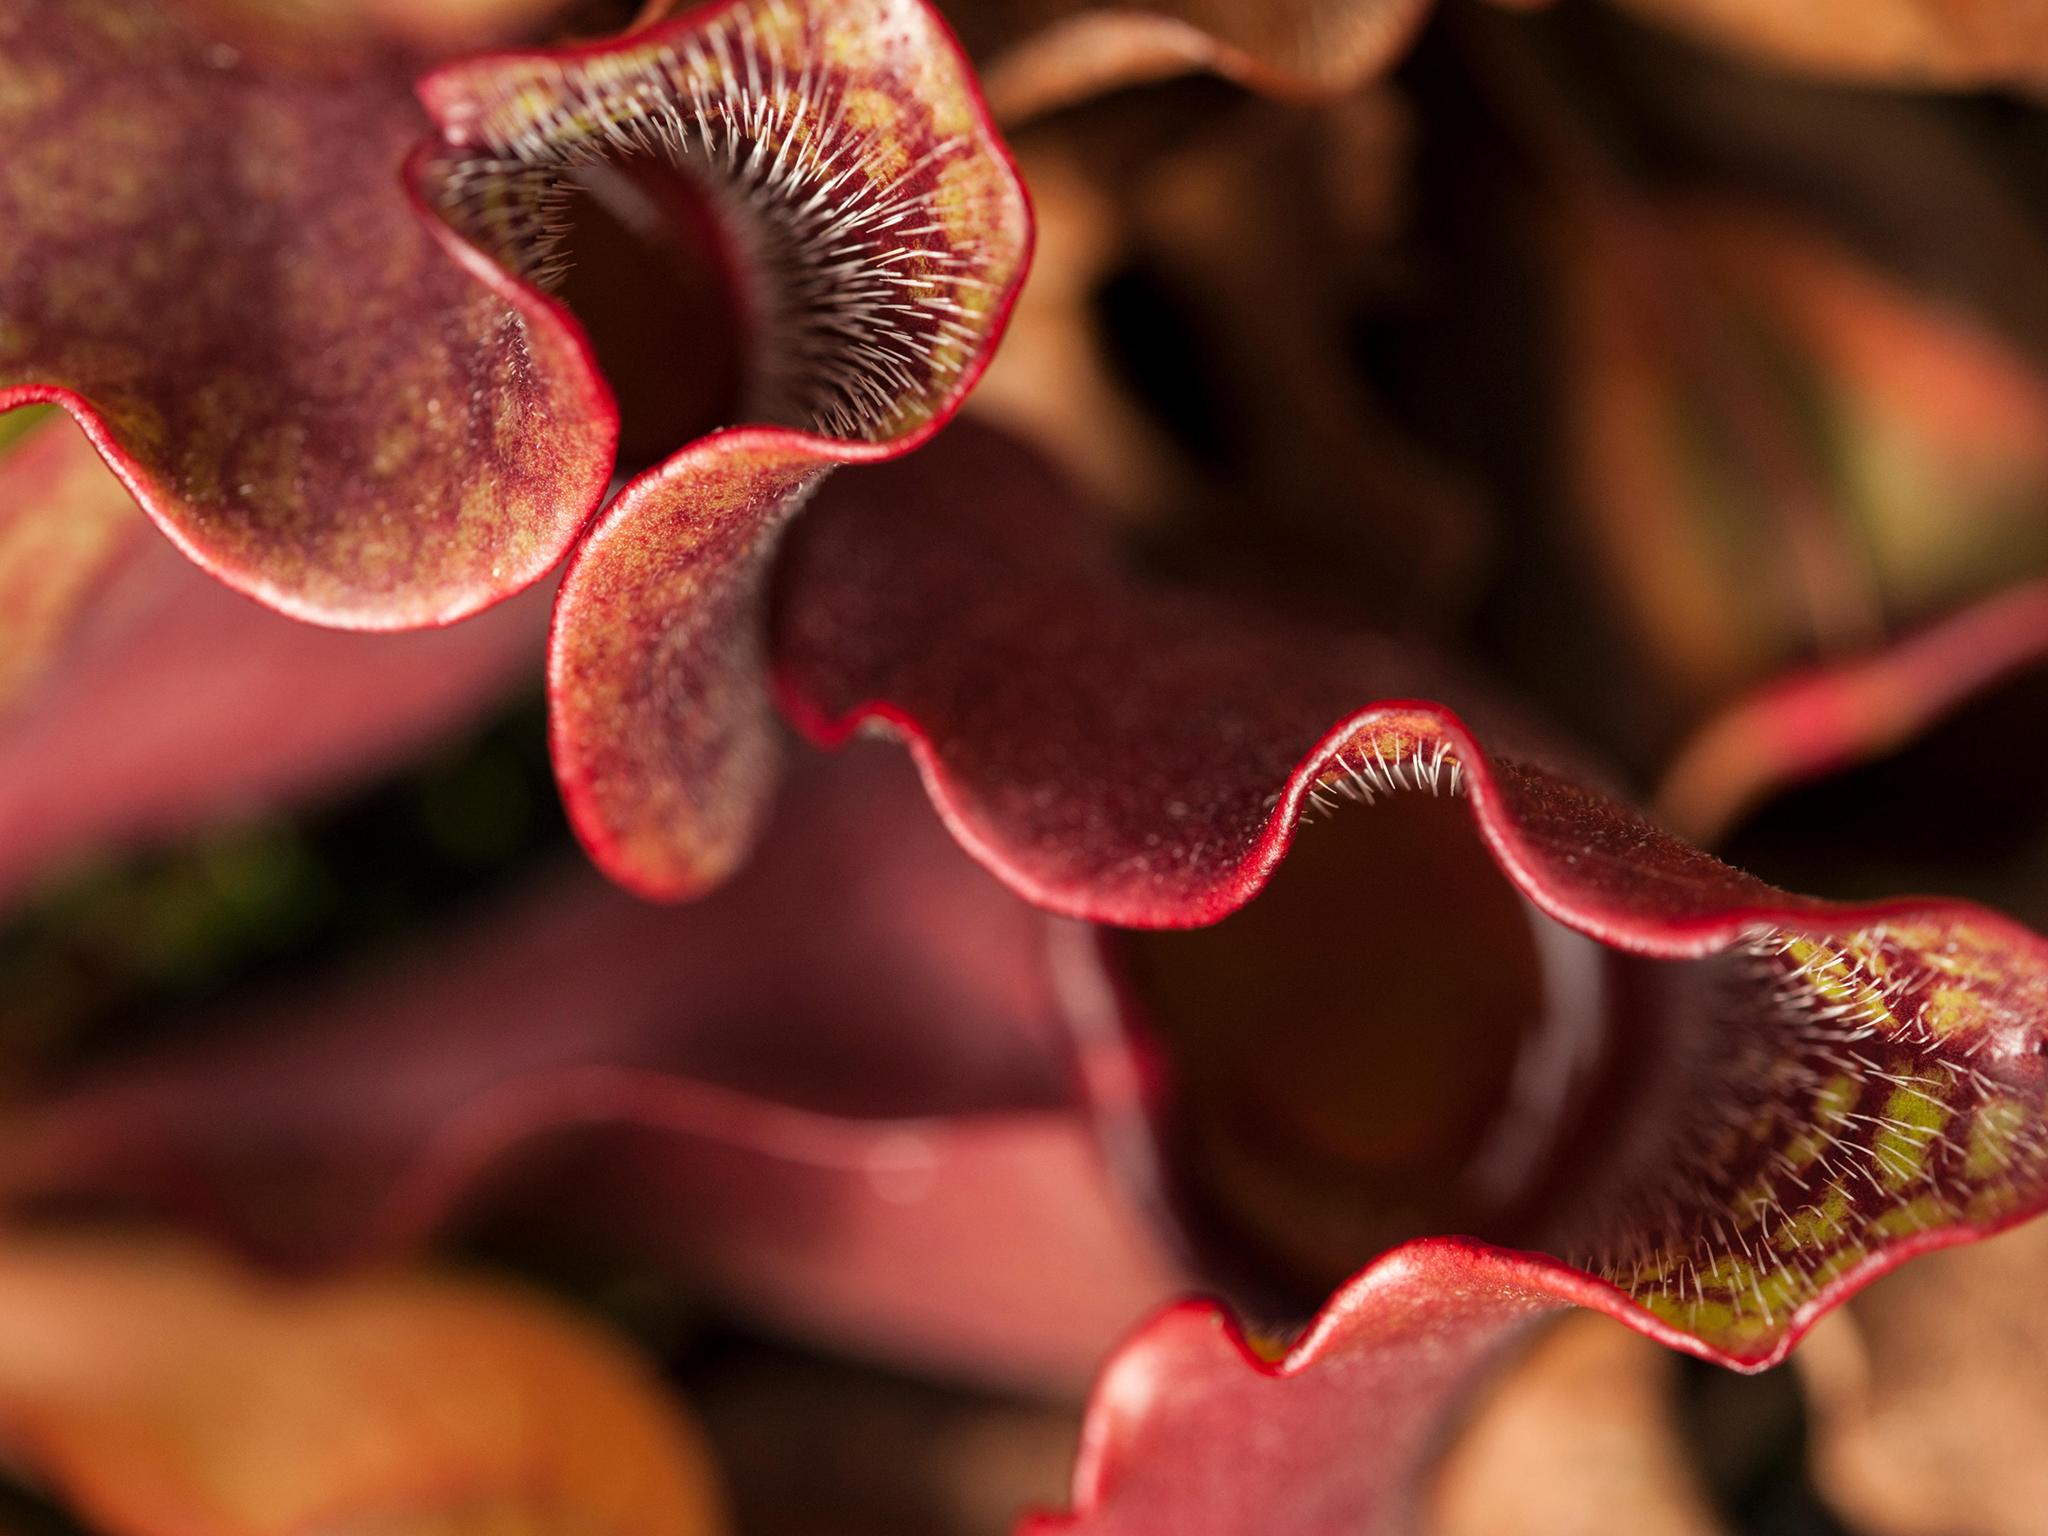 How carnivorous plant species function may reveal the secrets of plant and insect life